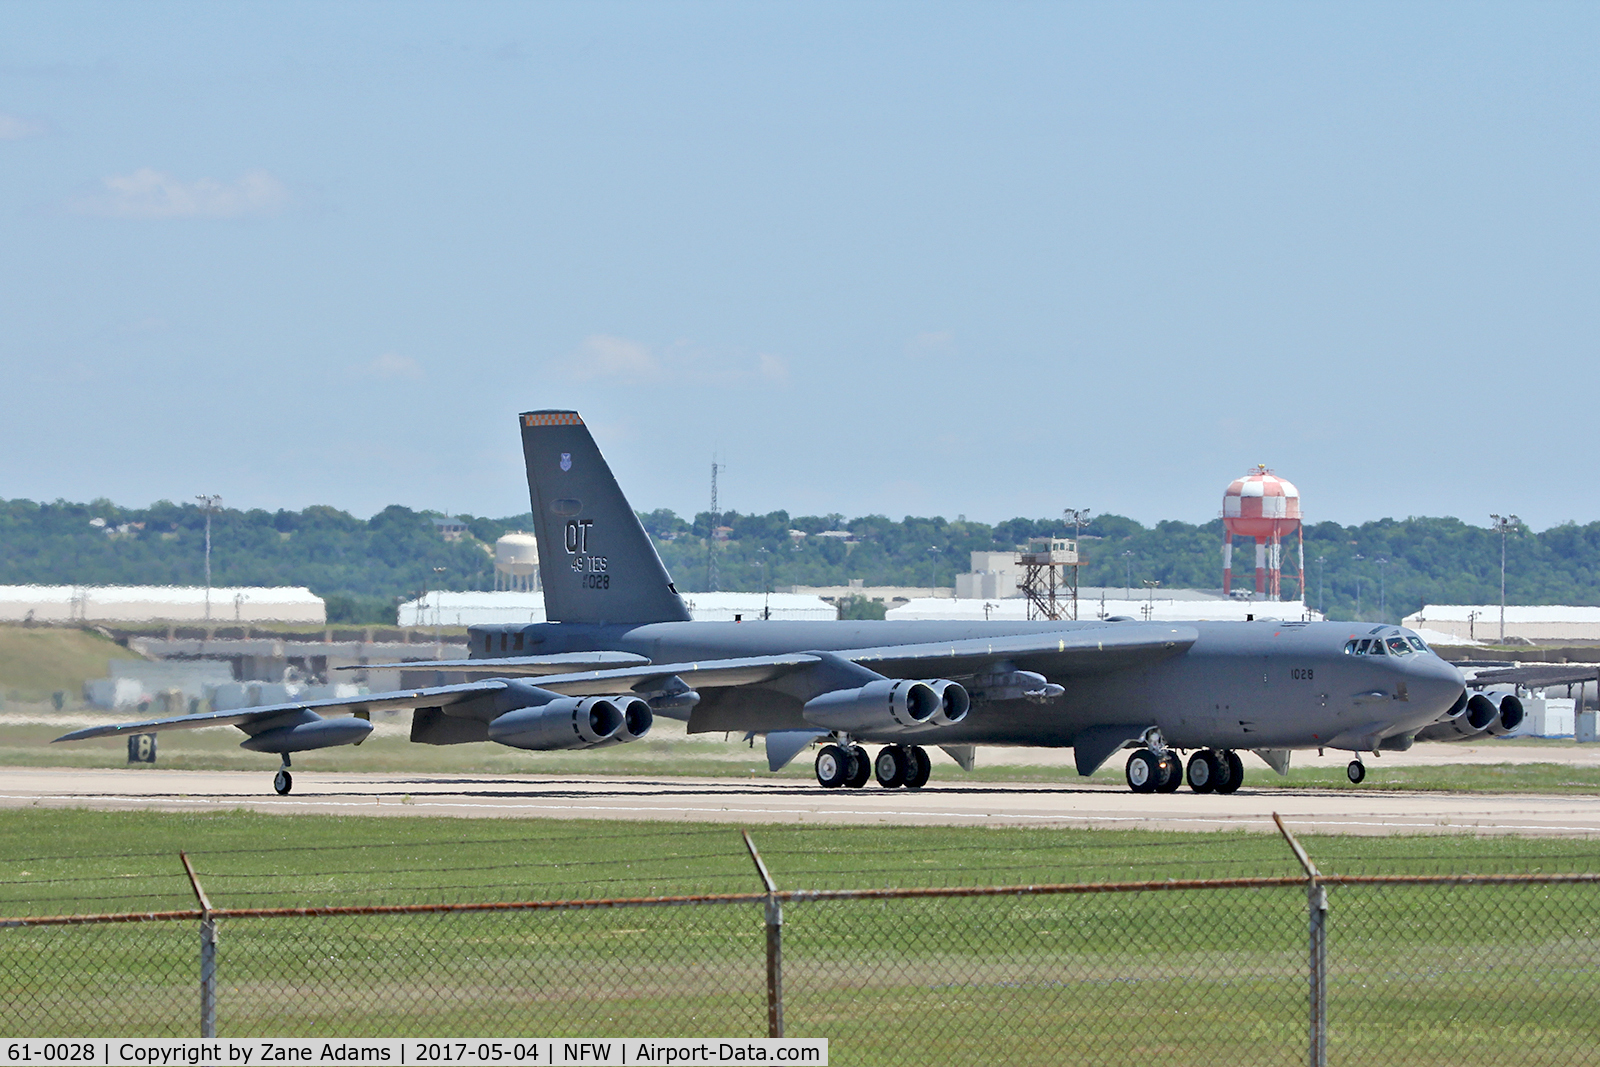 61-0028, 1961 Boeing B-52H Stratofortress C/N 464455, At NAS Fort Worth